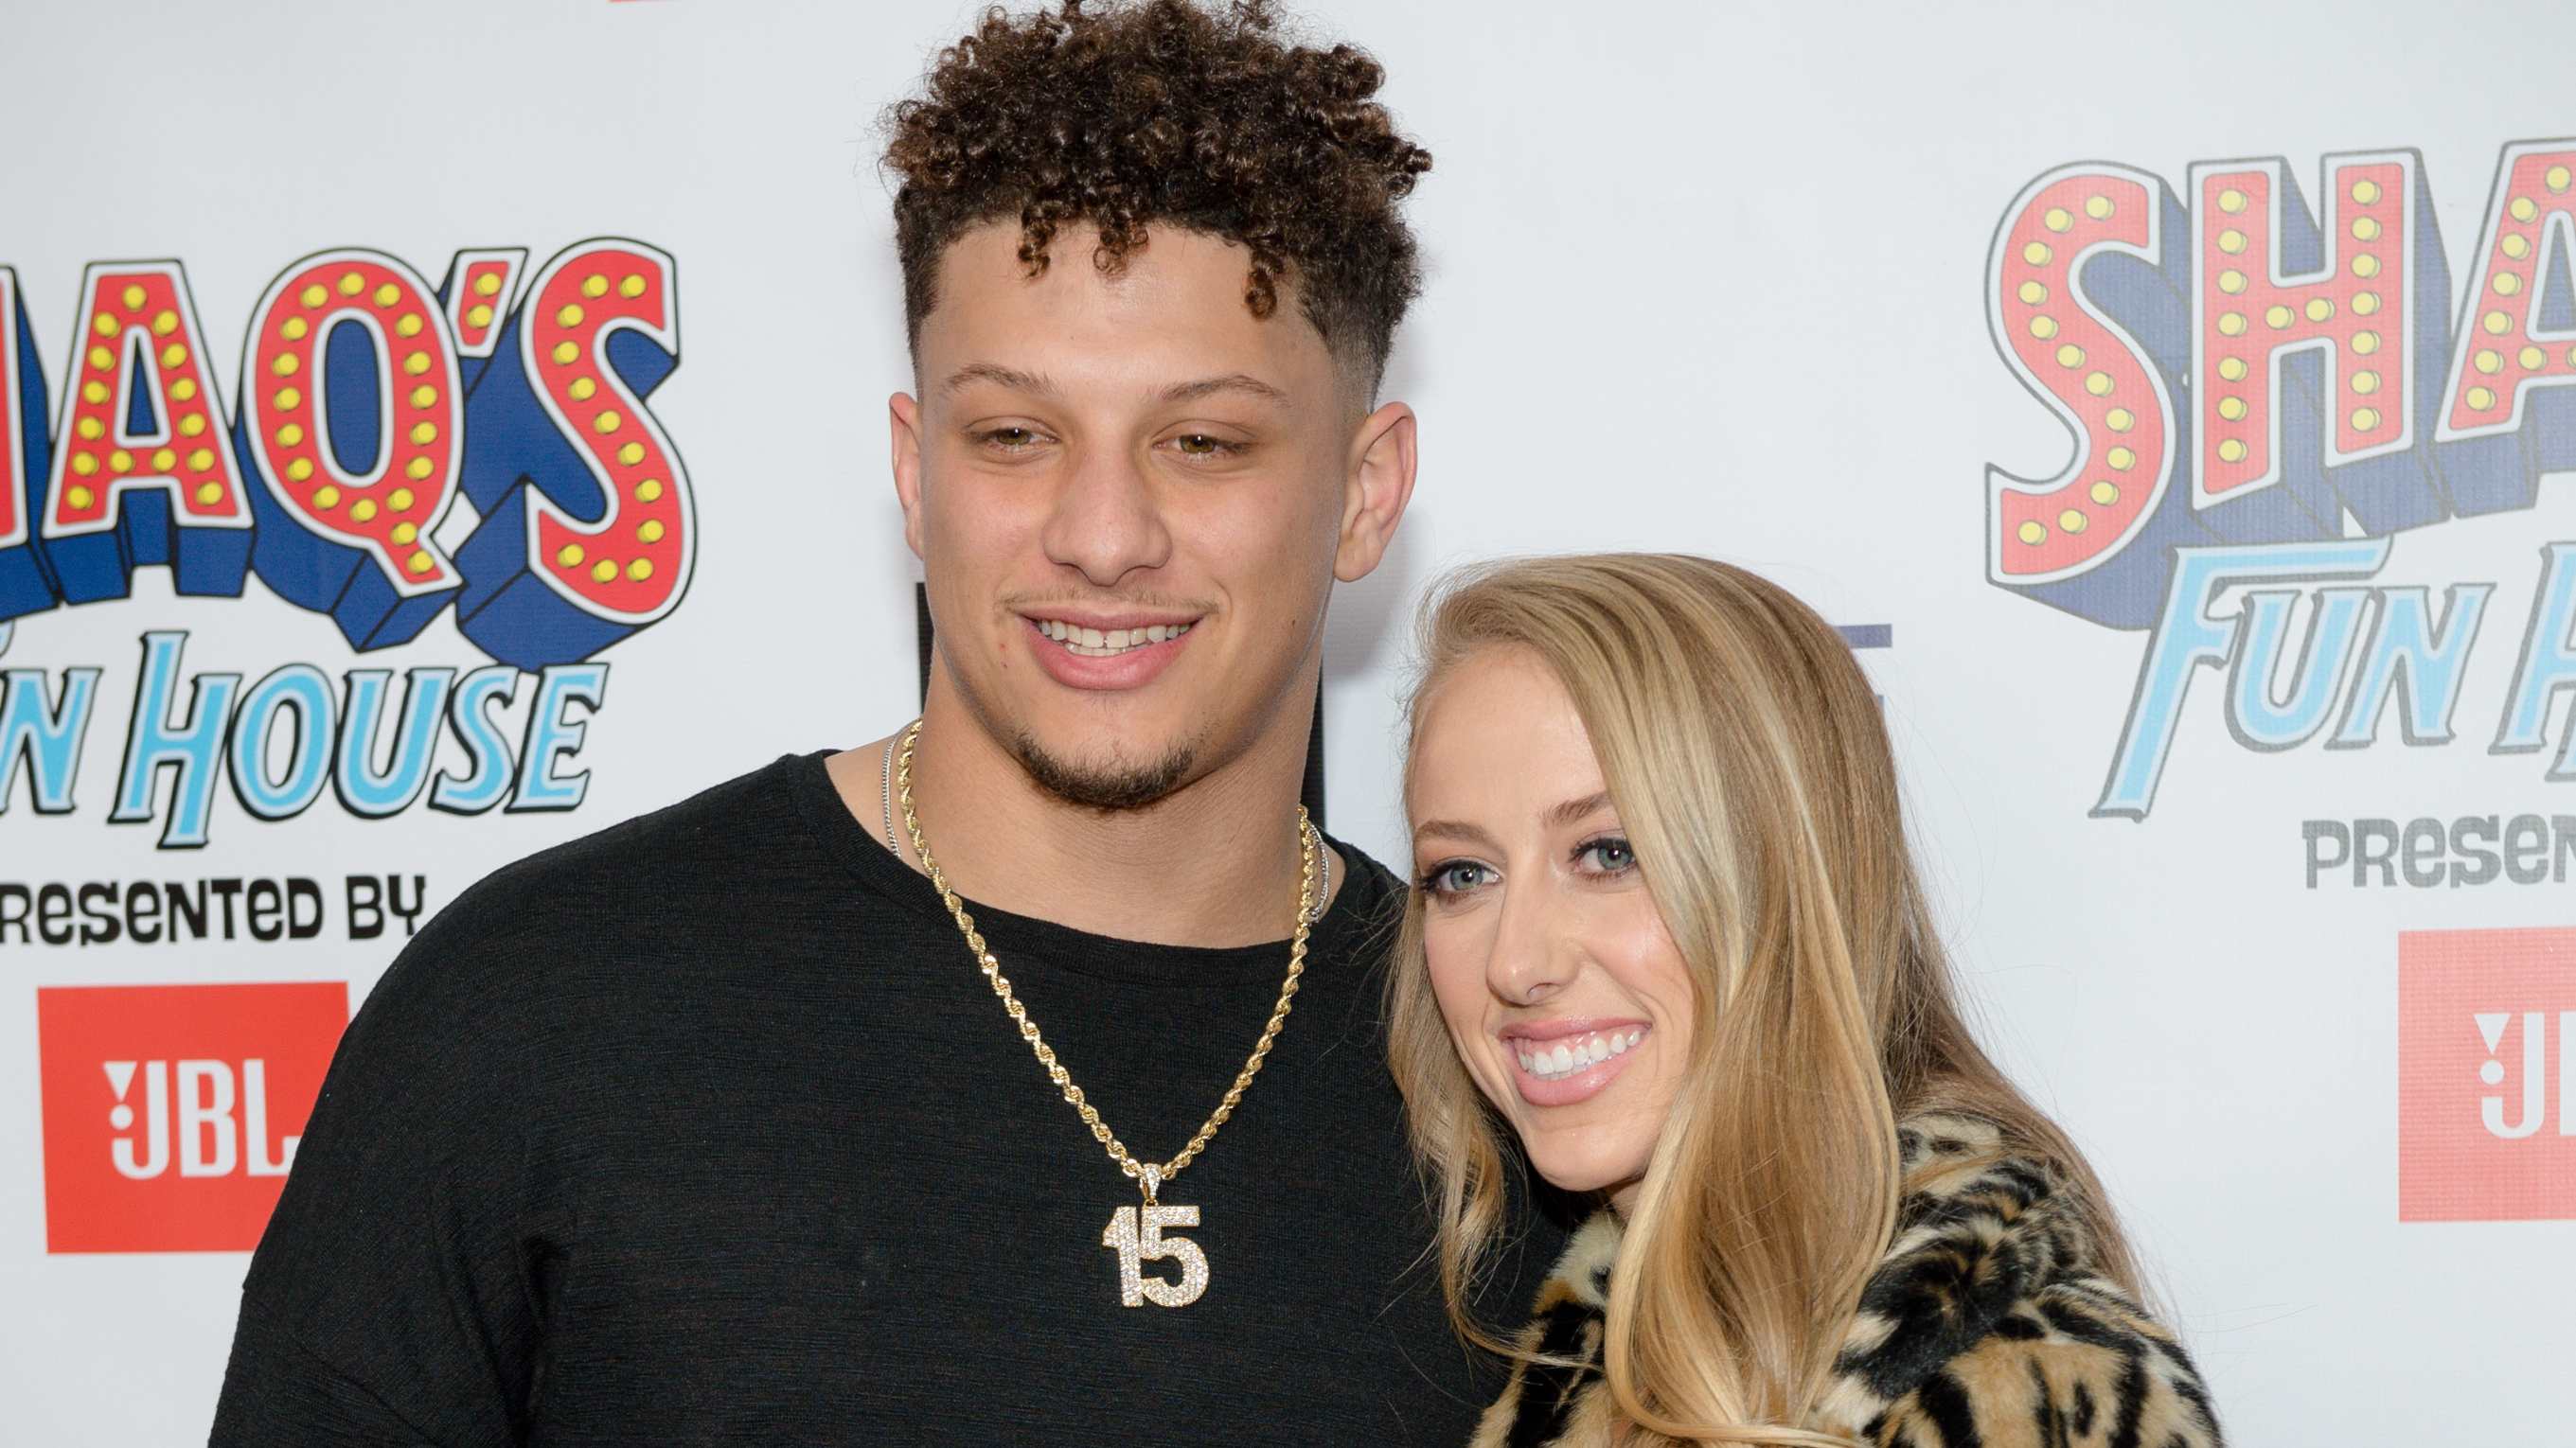 Patrick Mahomes reveals name of new child with wife Brittany